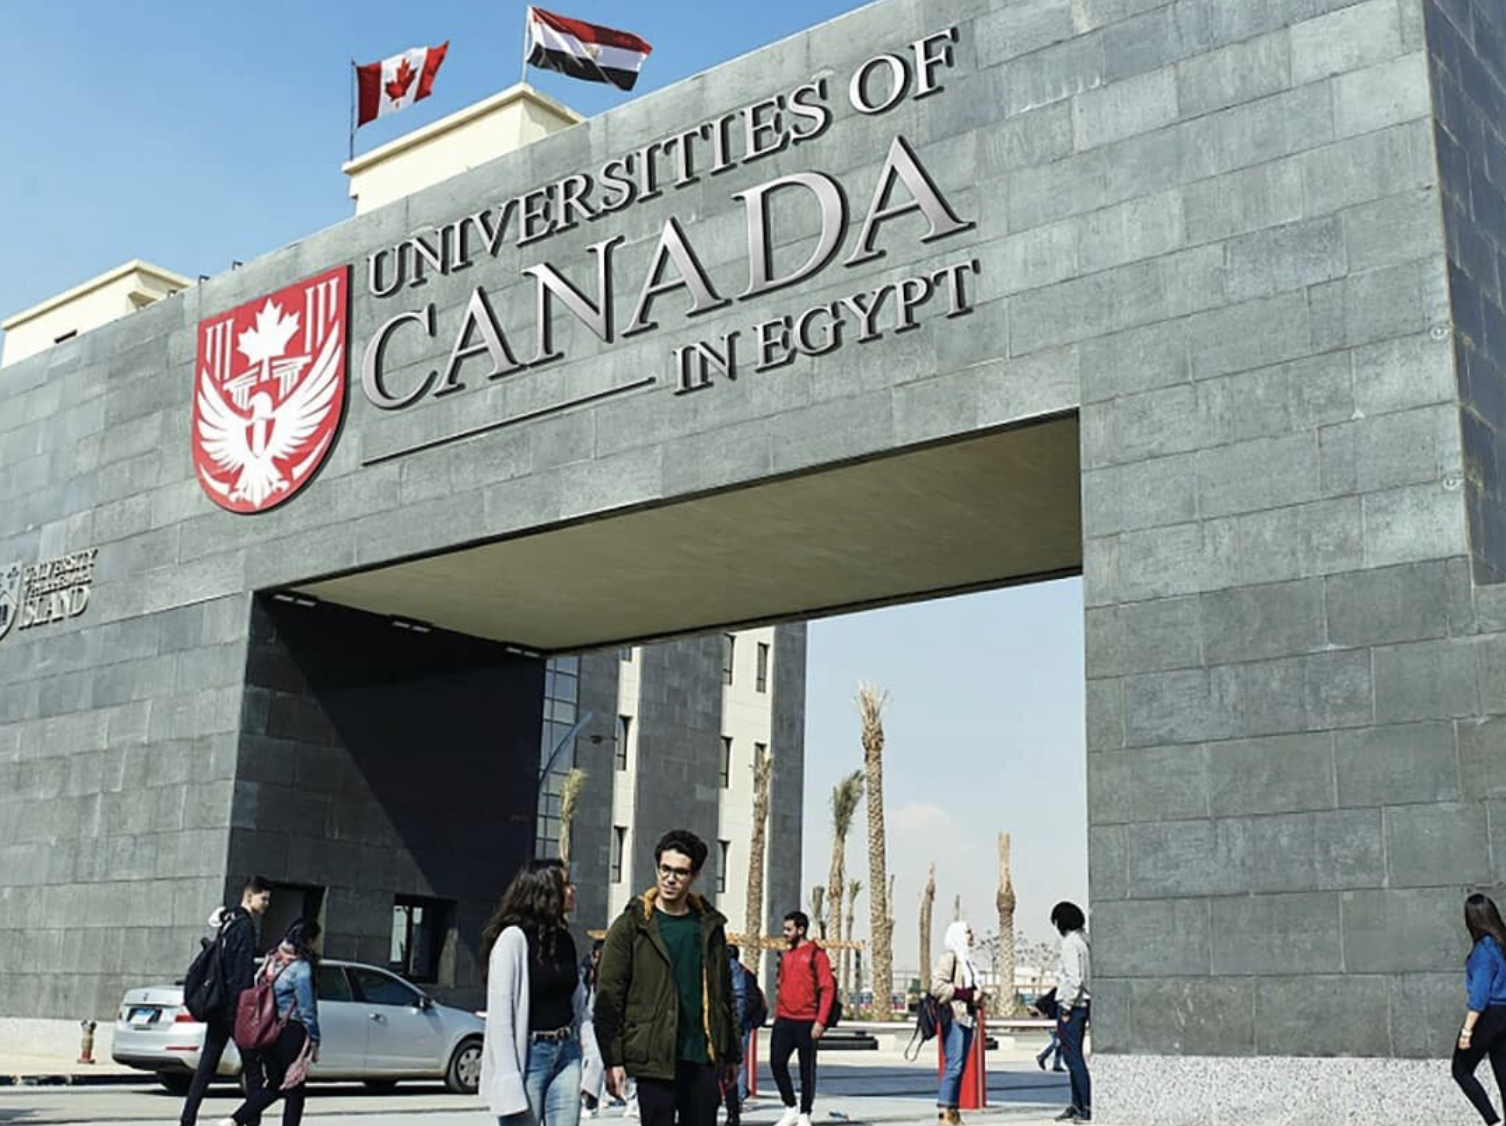 Universities of Canada in Egypt gates with students walking outside.